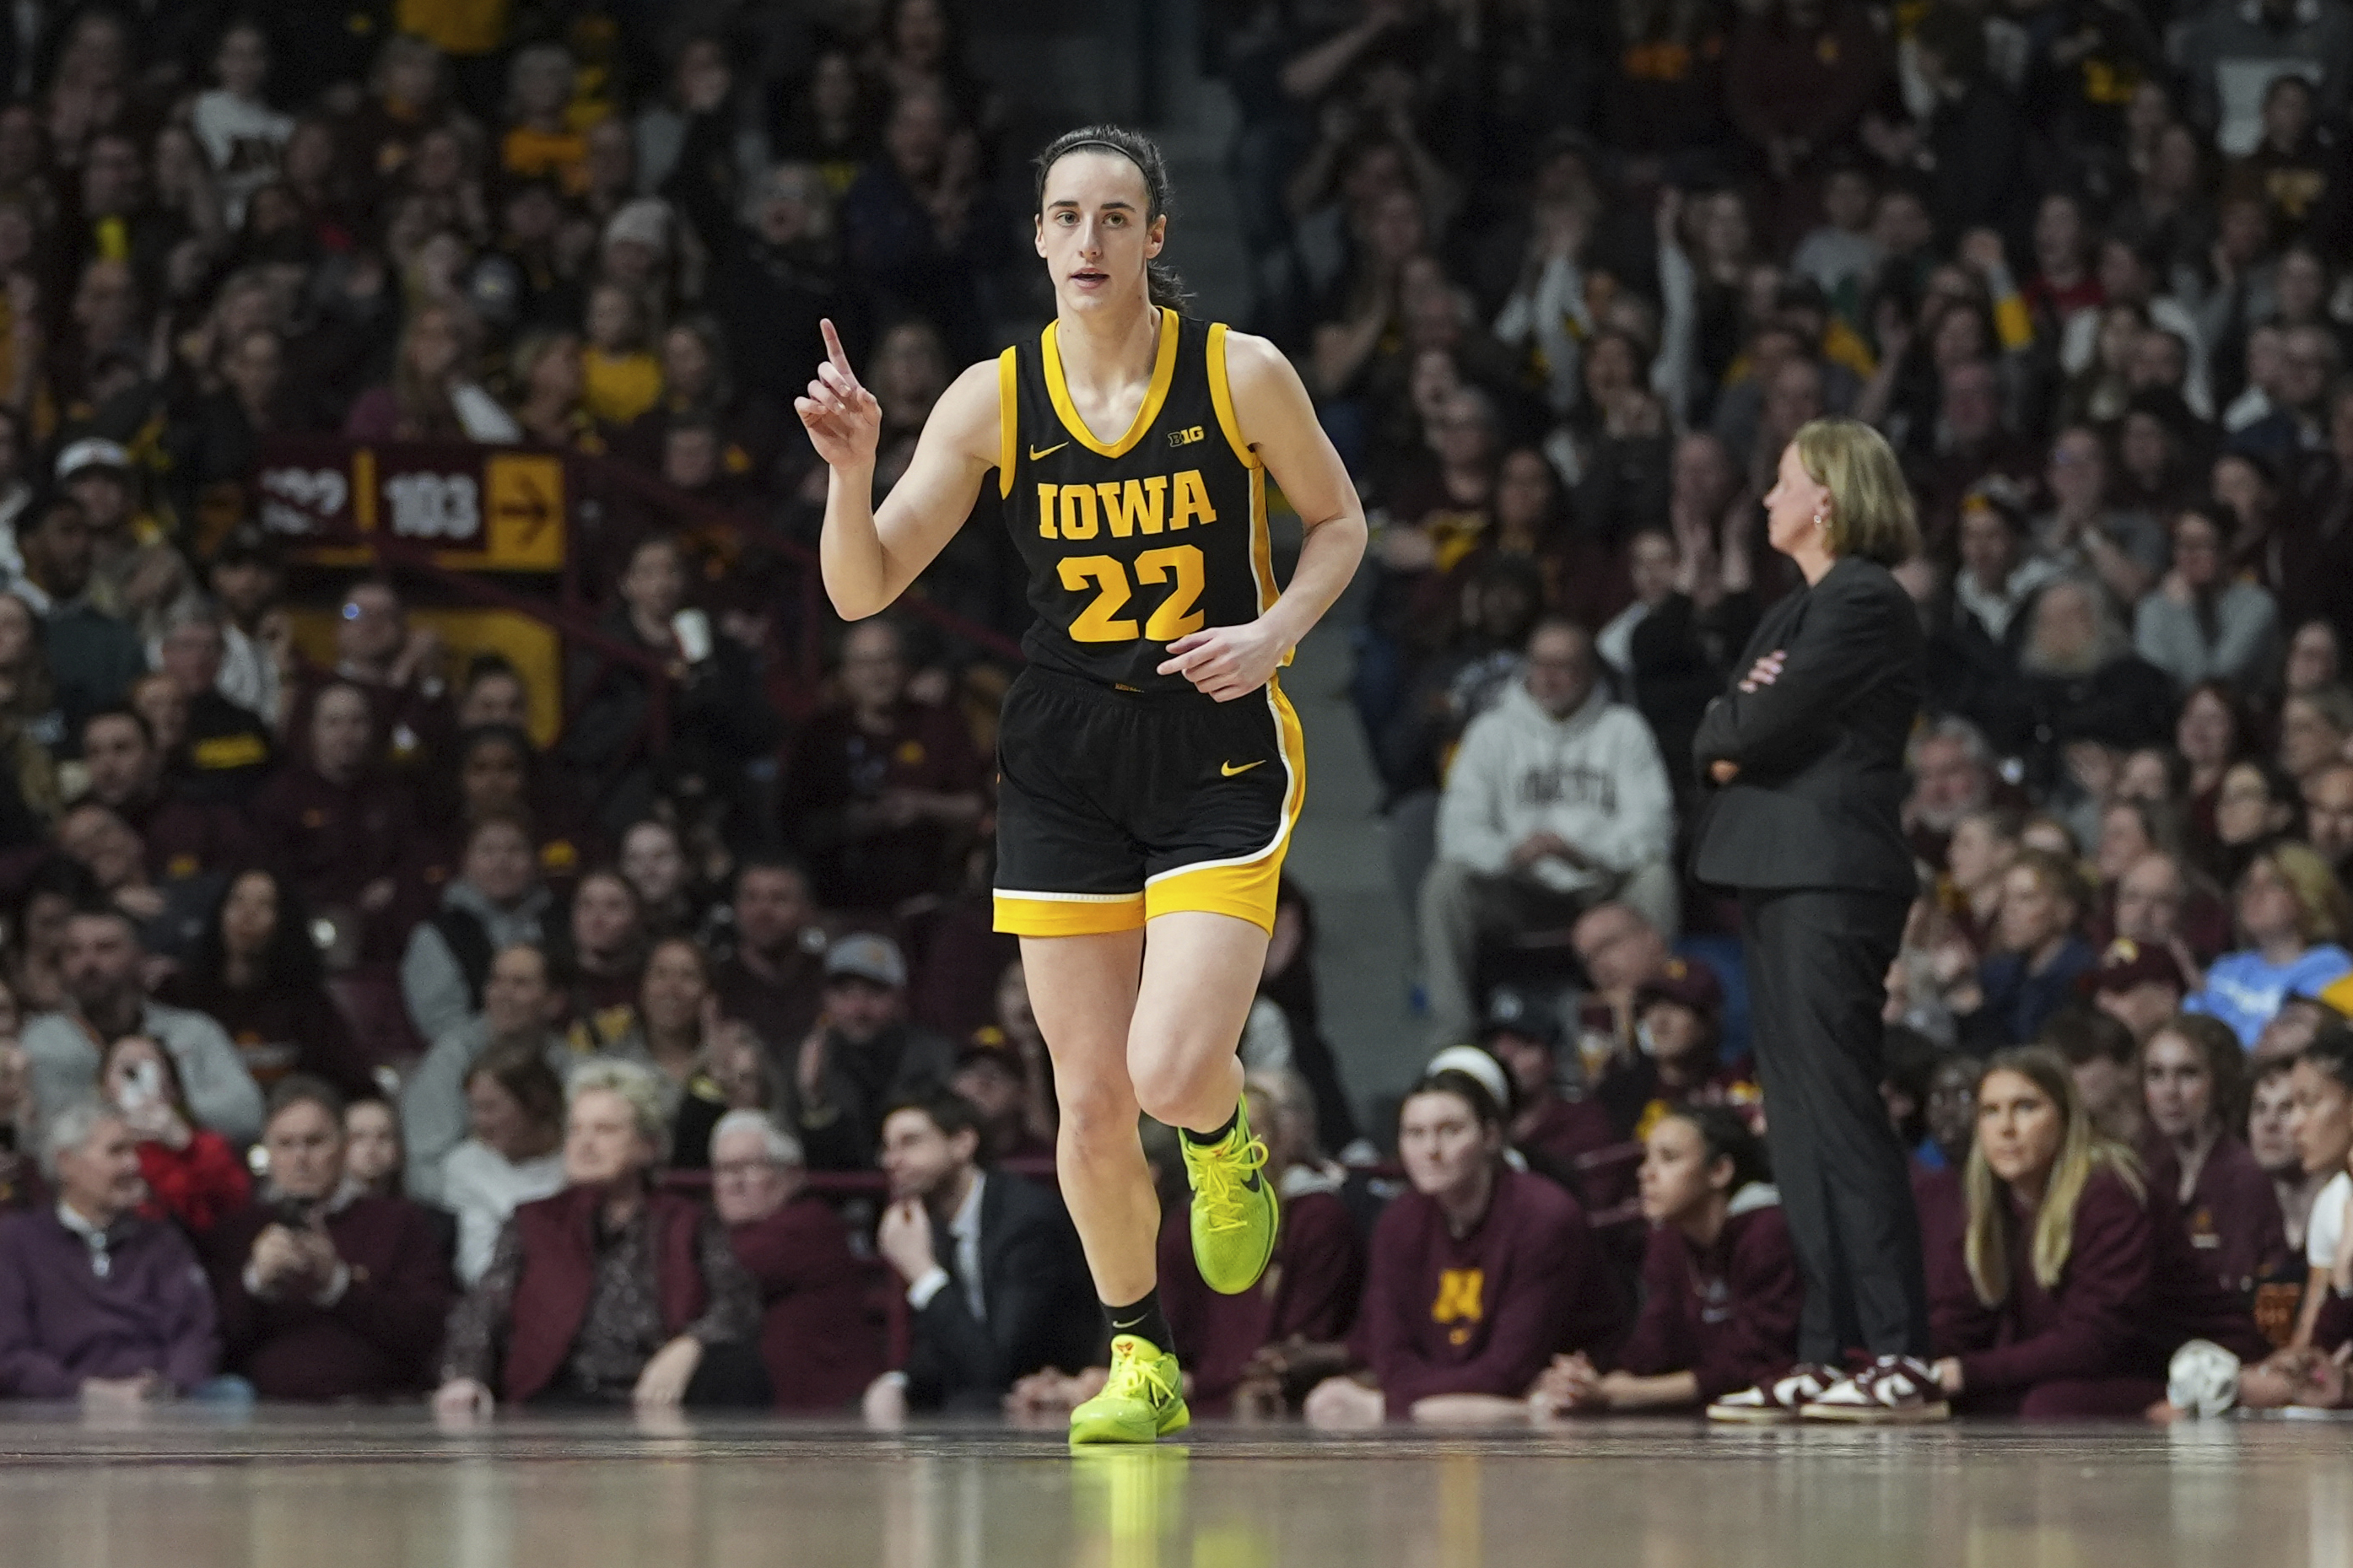 iowa’s record-setting caitlin clark drives record-high ticket prices